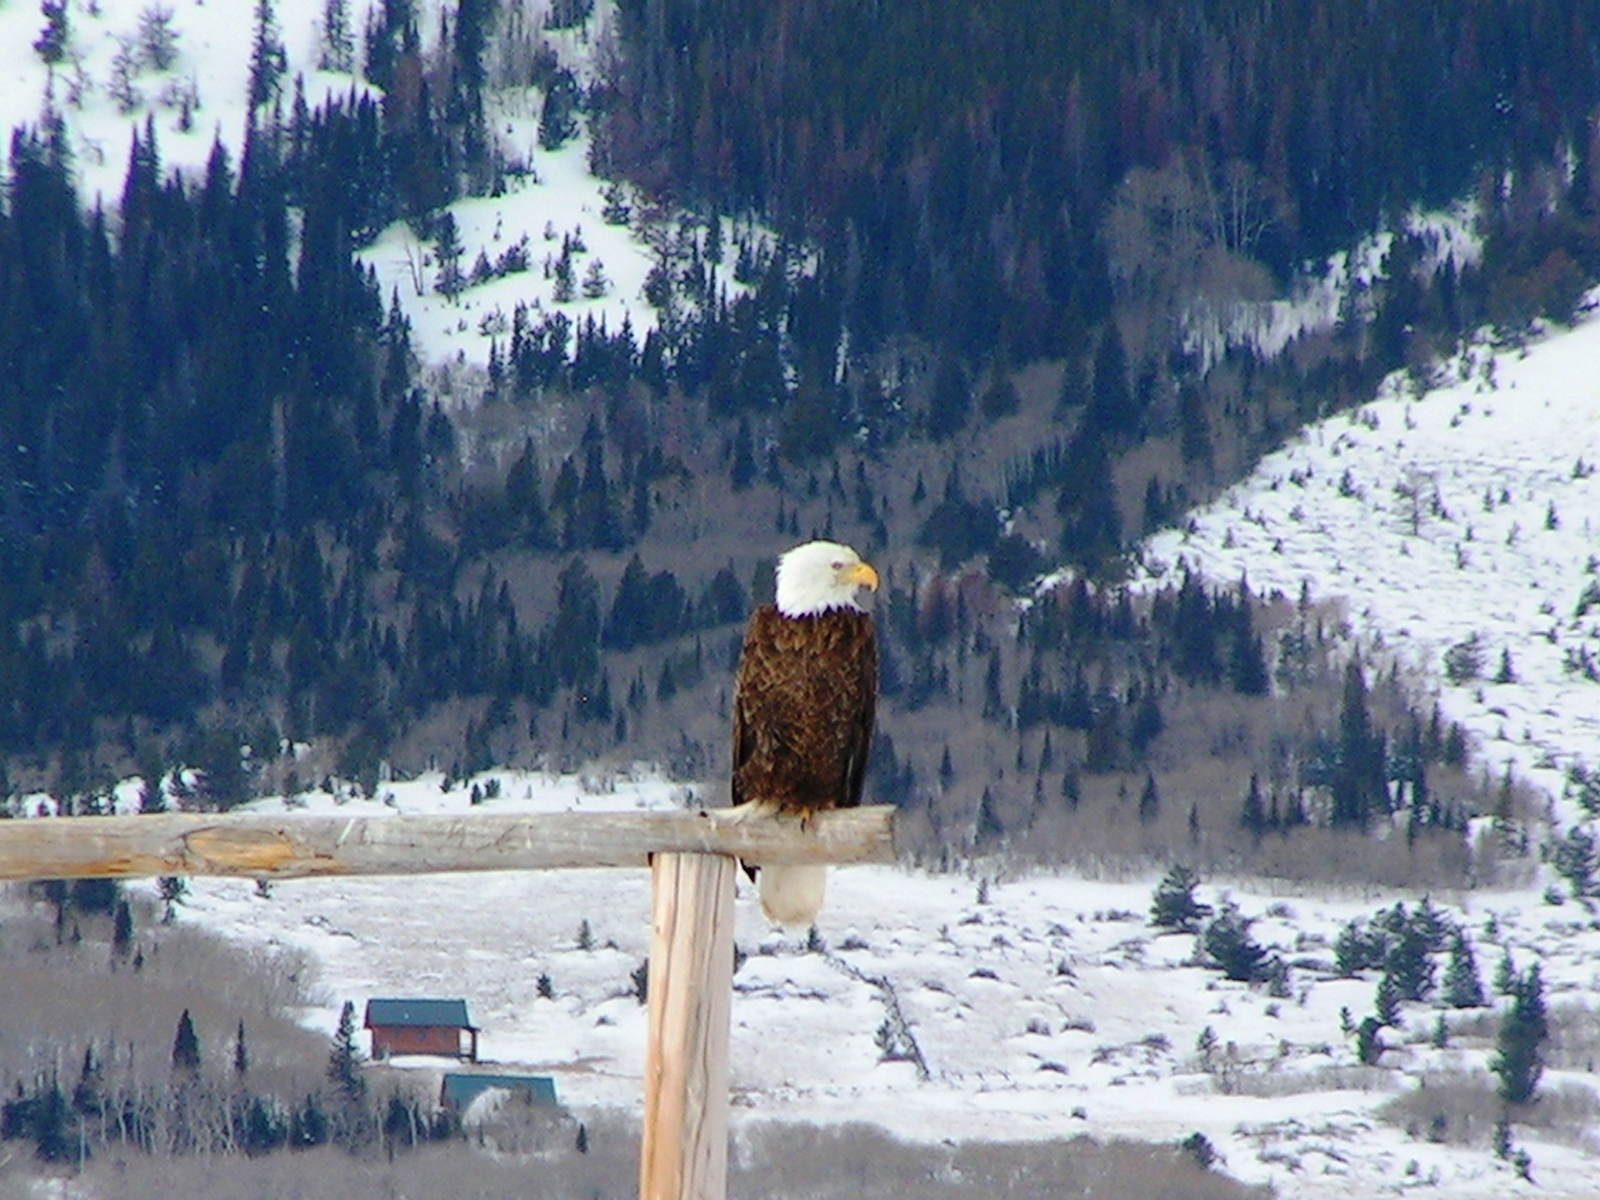 Bald eagle in the winter in Wyoming's Carbon County